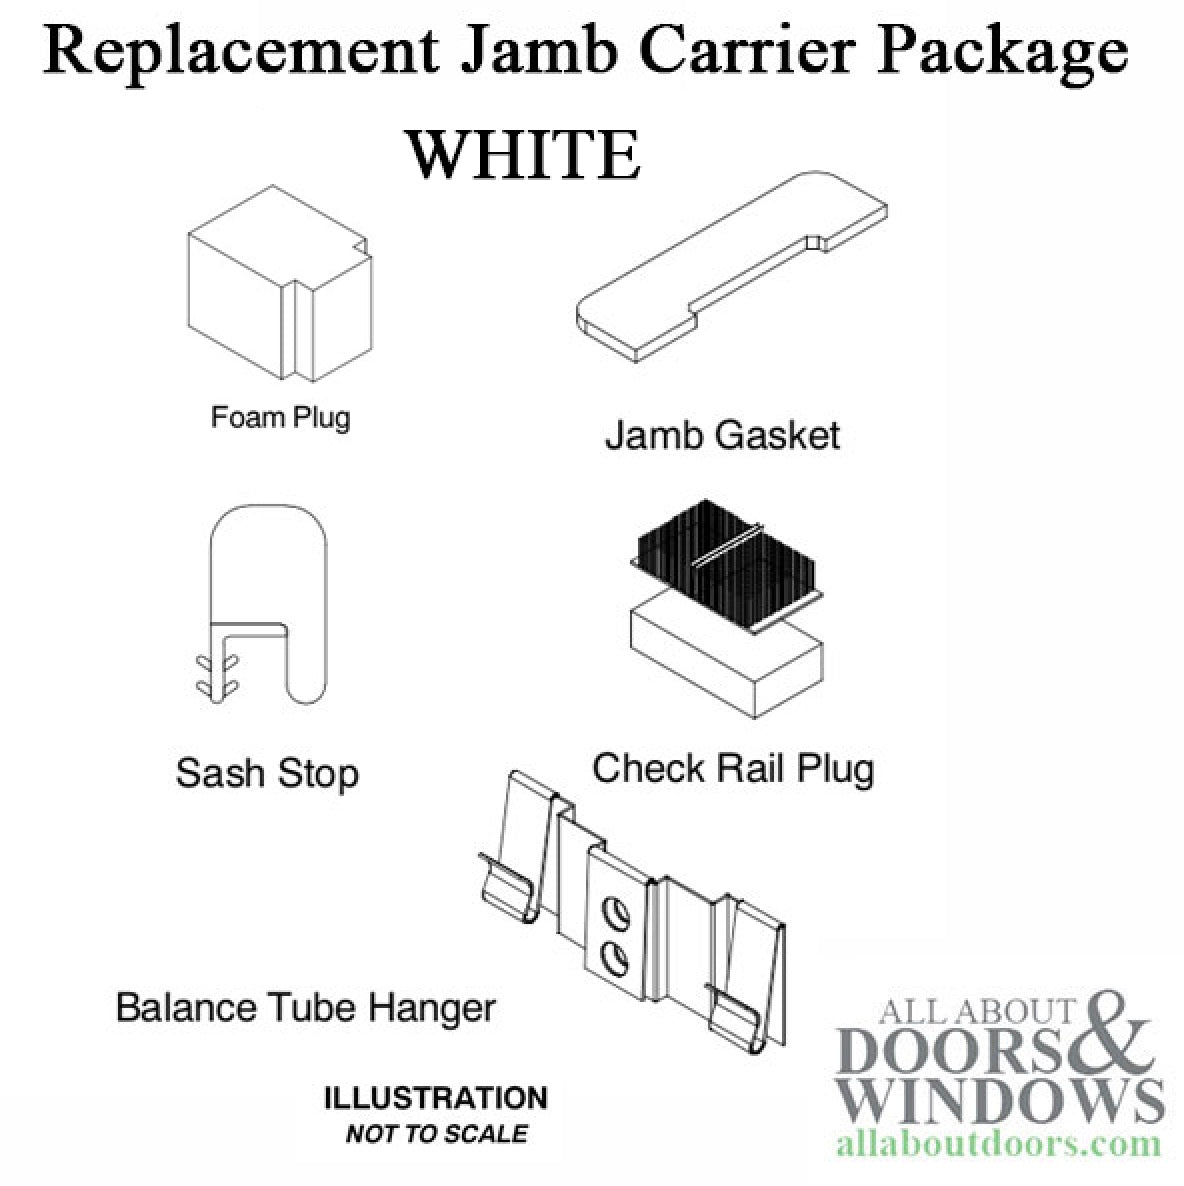 Marvin Replacement Jamb Carrier Package, Ultimate Double Hung - White - Marvin Replacement Jamb Carrier Package, Ultimate Double Hung - White